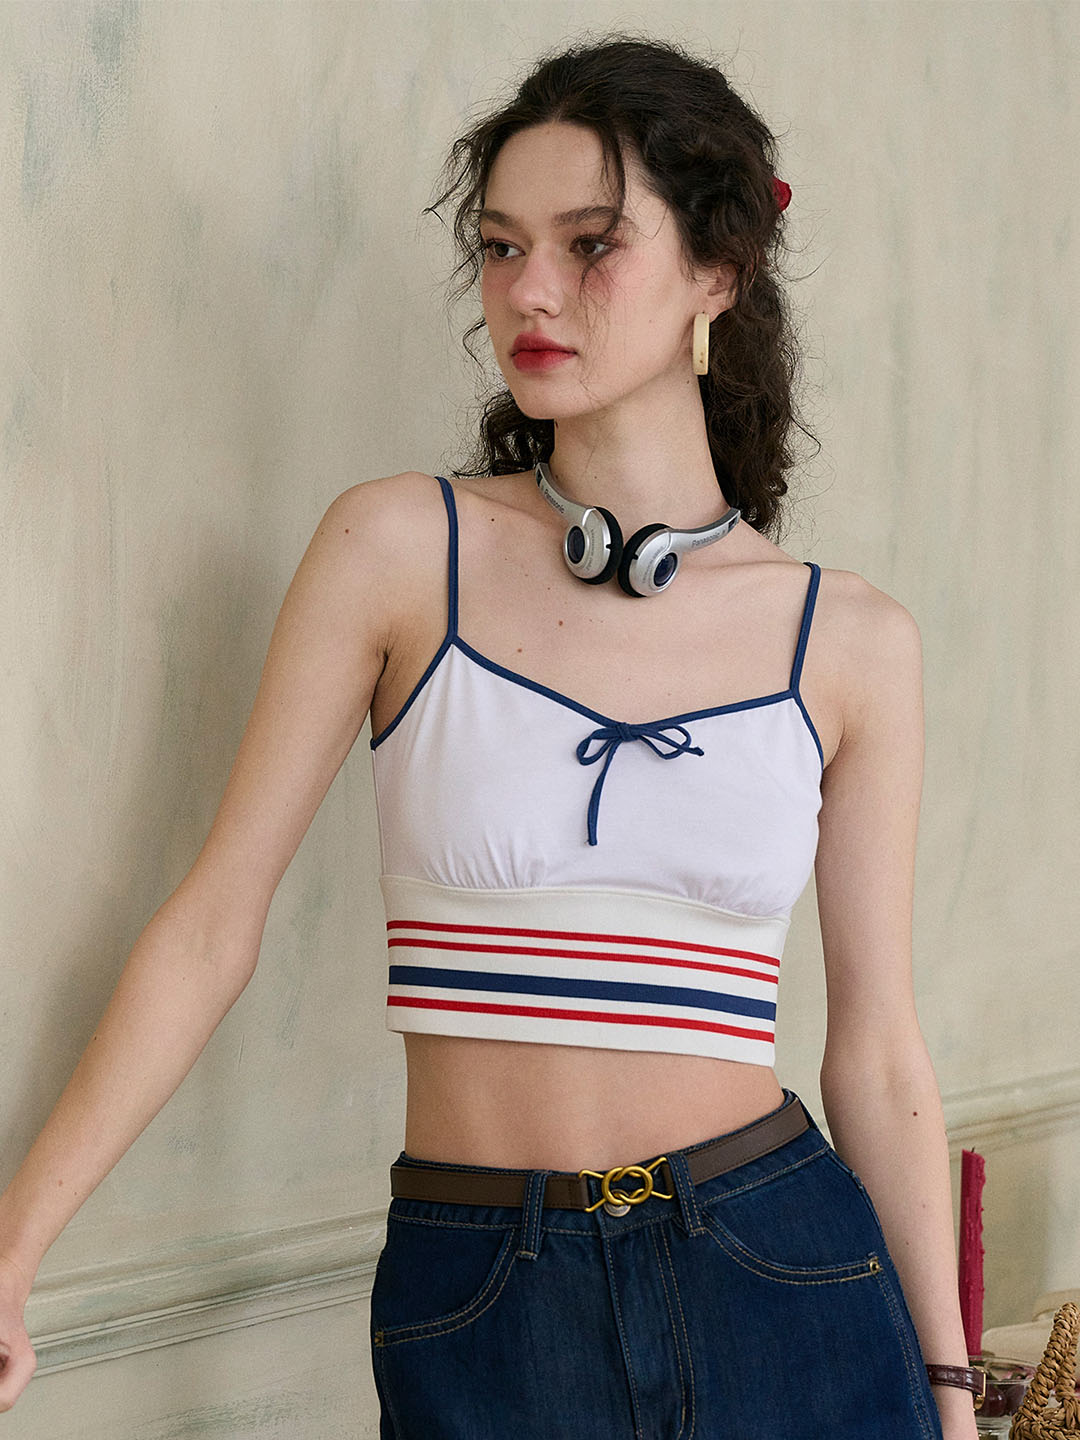 (Add-on Item) Jessica Small V-neck Contrast Bow Striped Cotton Camisole Top